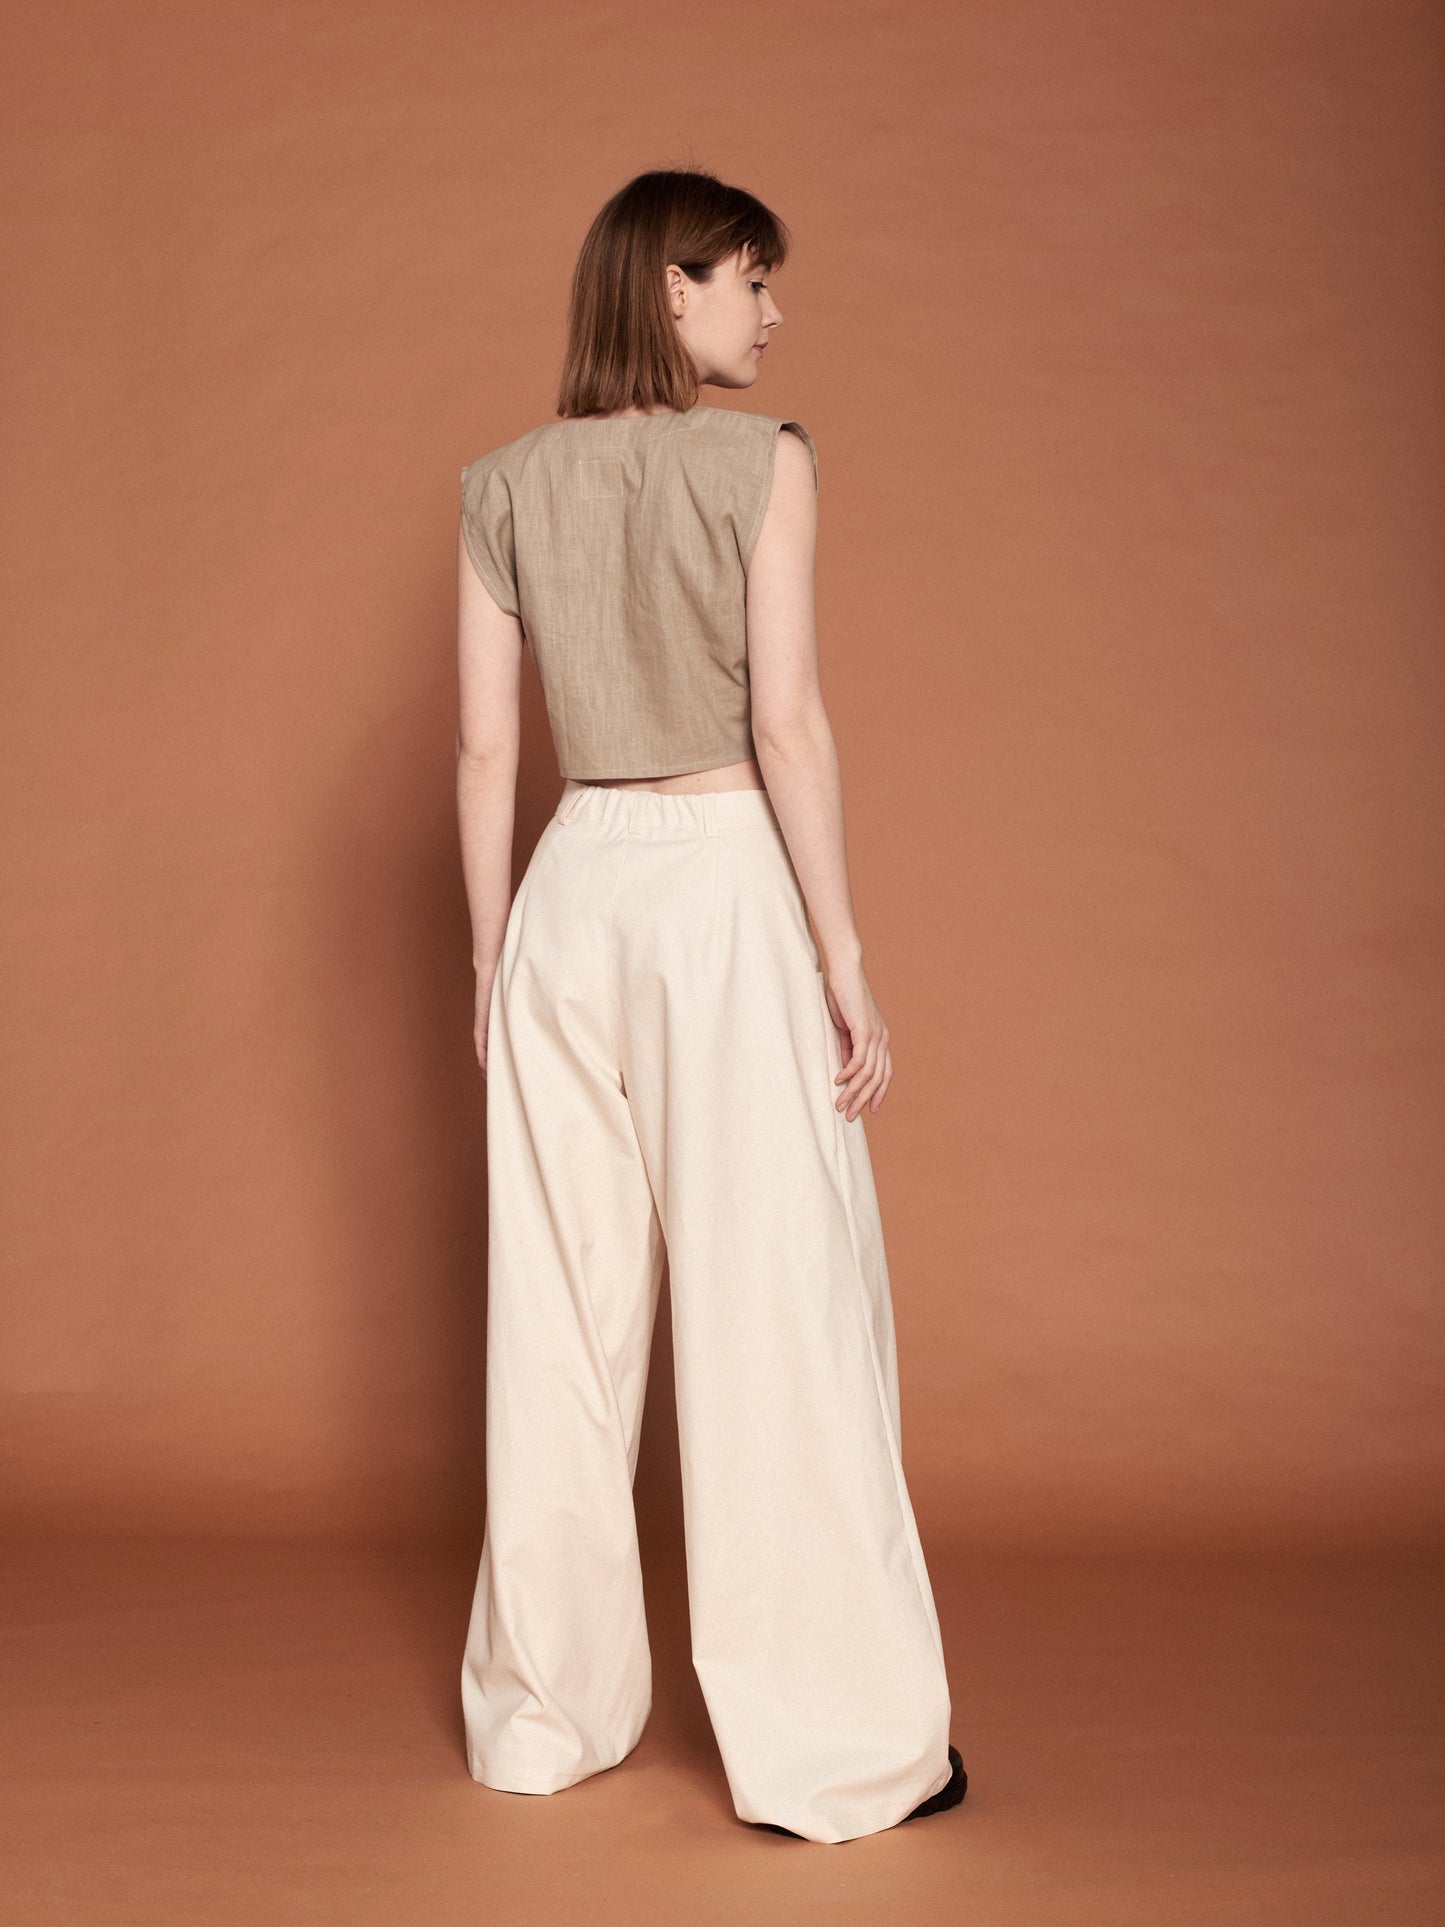 Overlapping sand coloured linen top